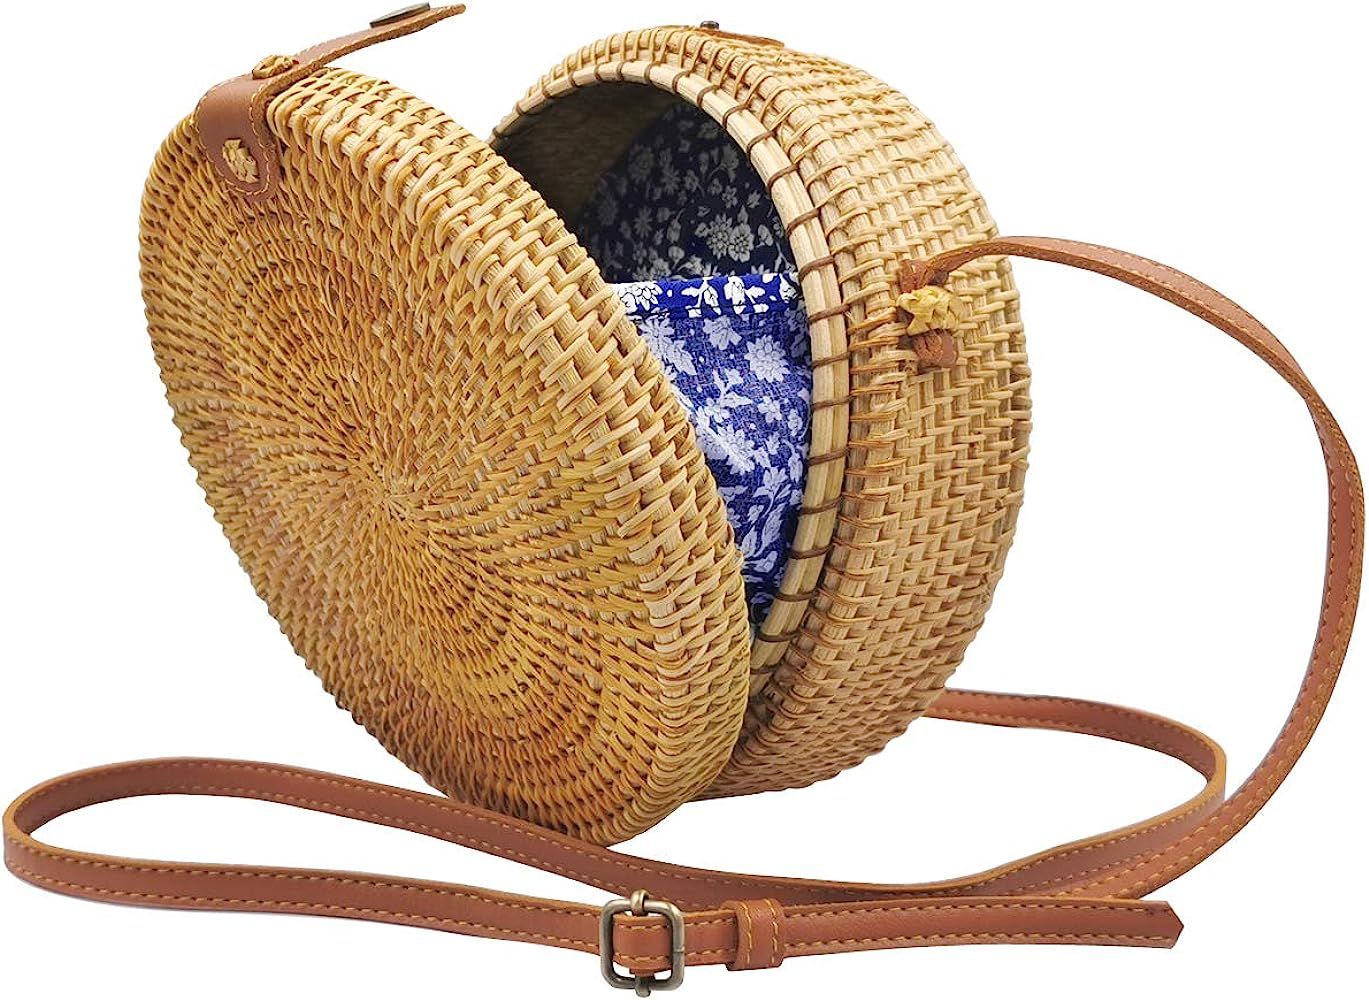 Handwoven Round Rattan Bag for Women Bali Ata Straw Bags Adjustable Shoulder Leather Straps | Amazon (US)